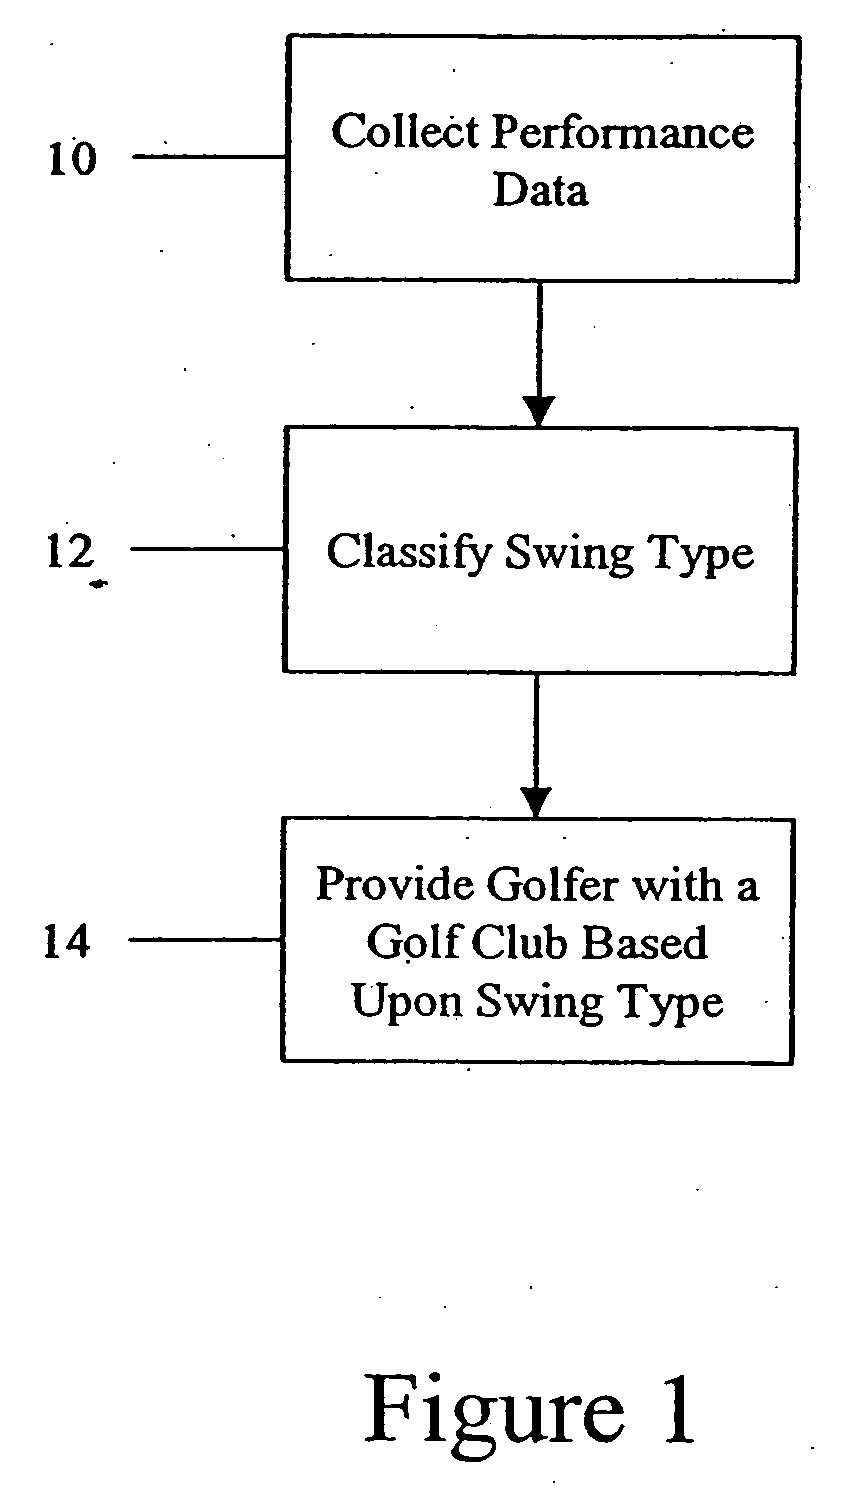 Method for matching a golfer with a particular club style